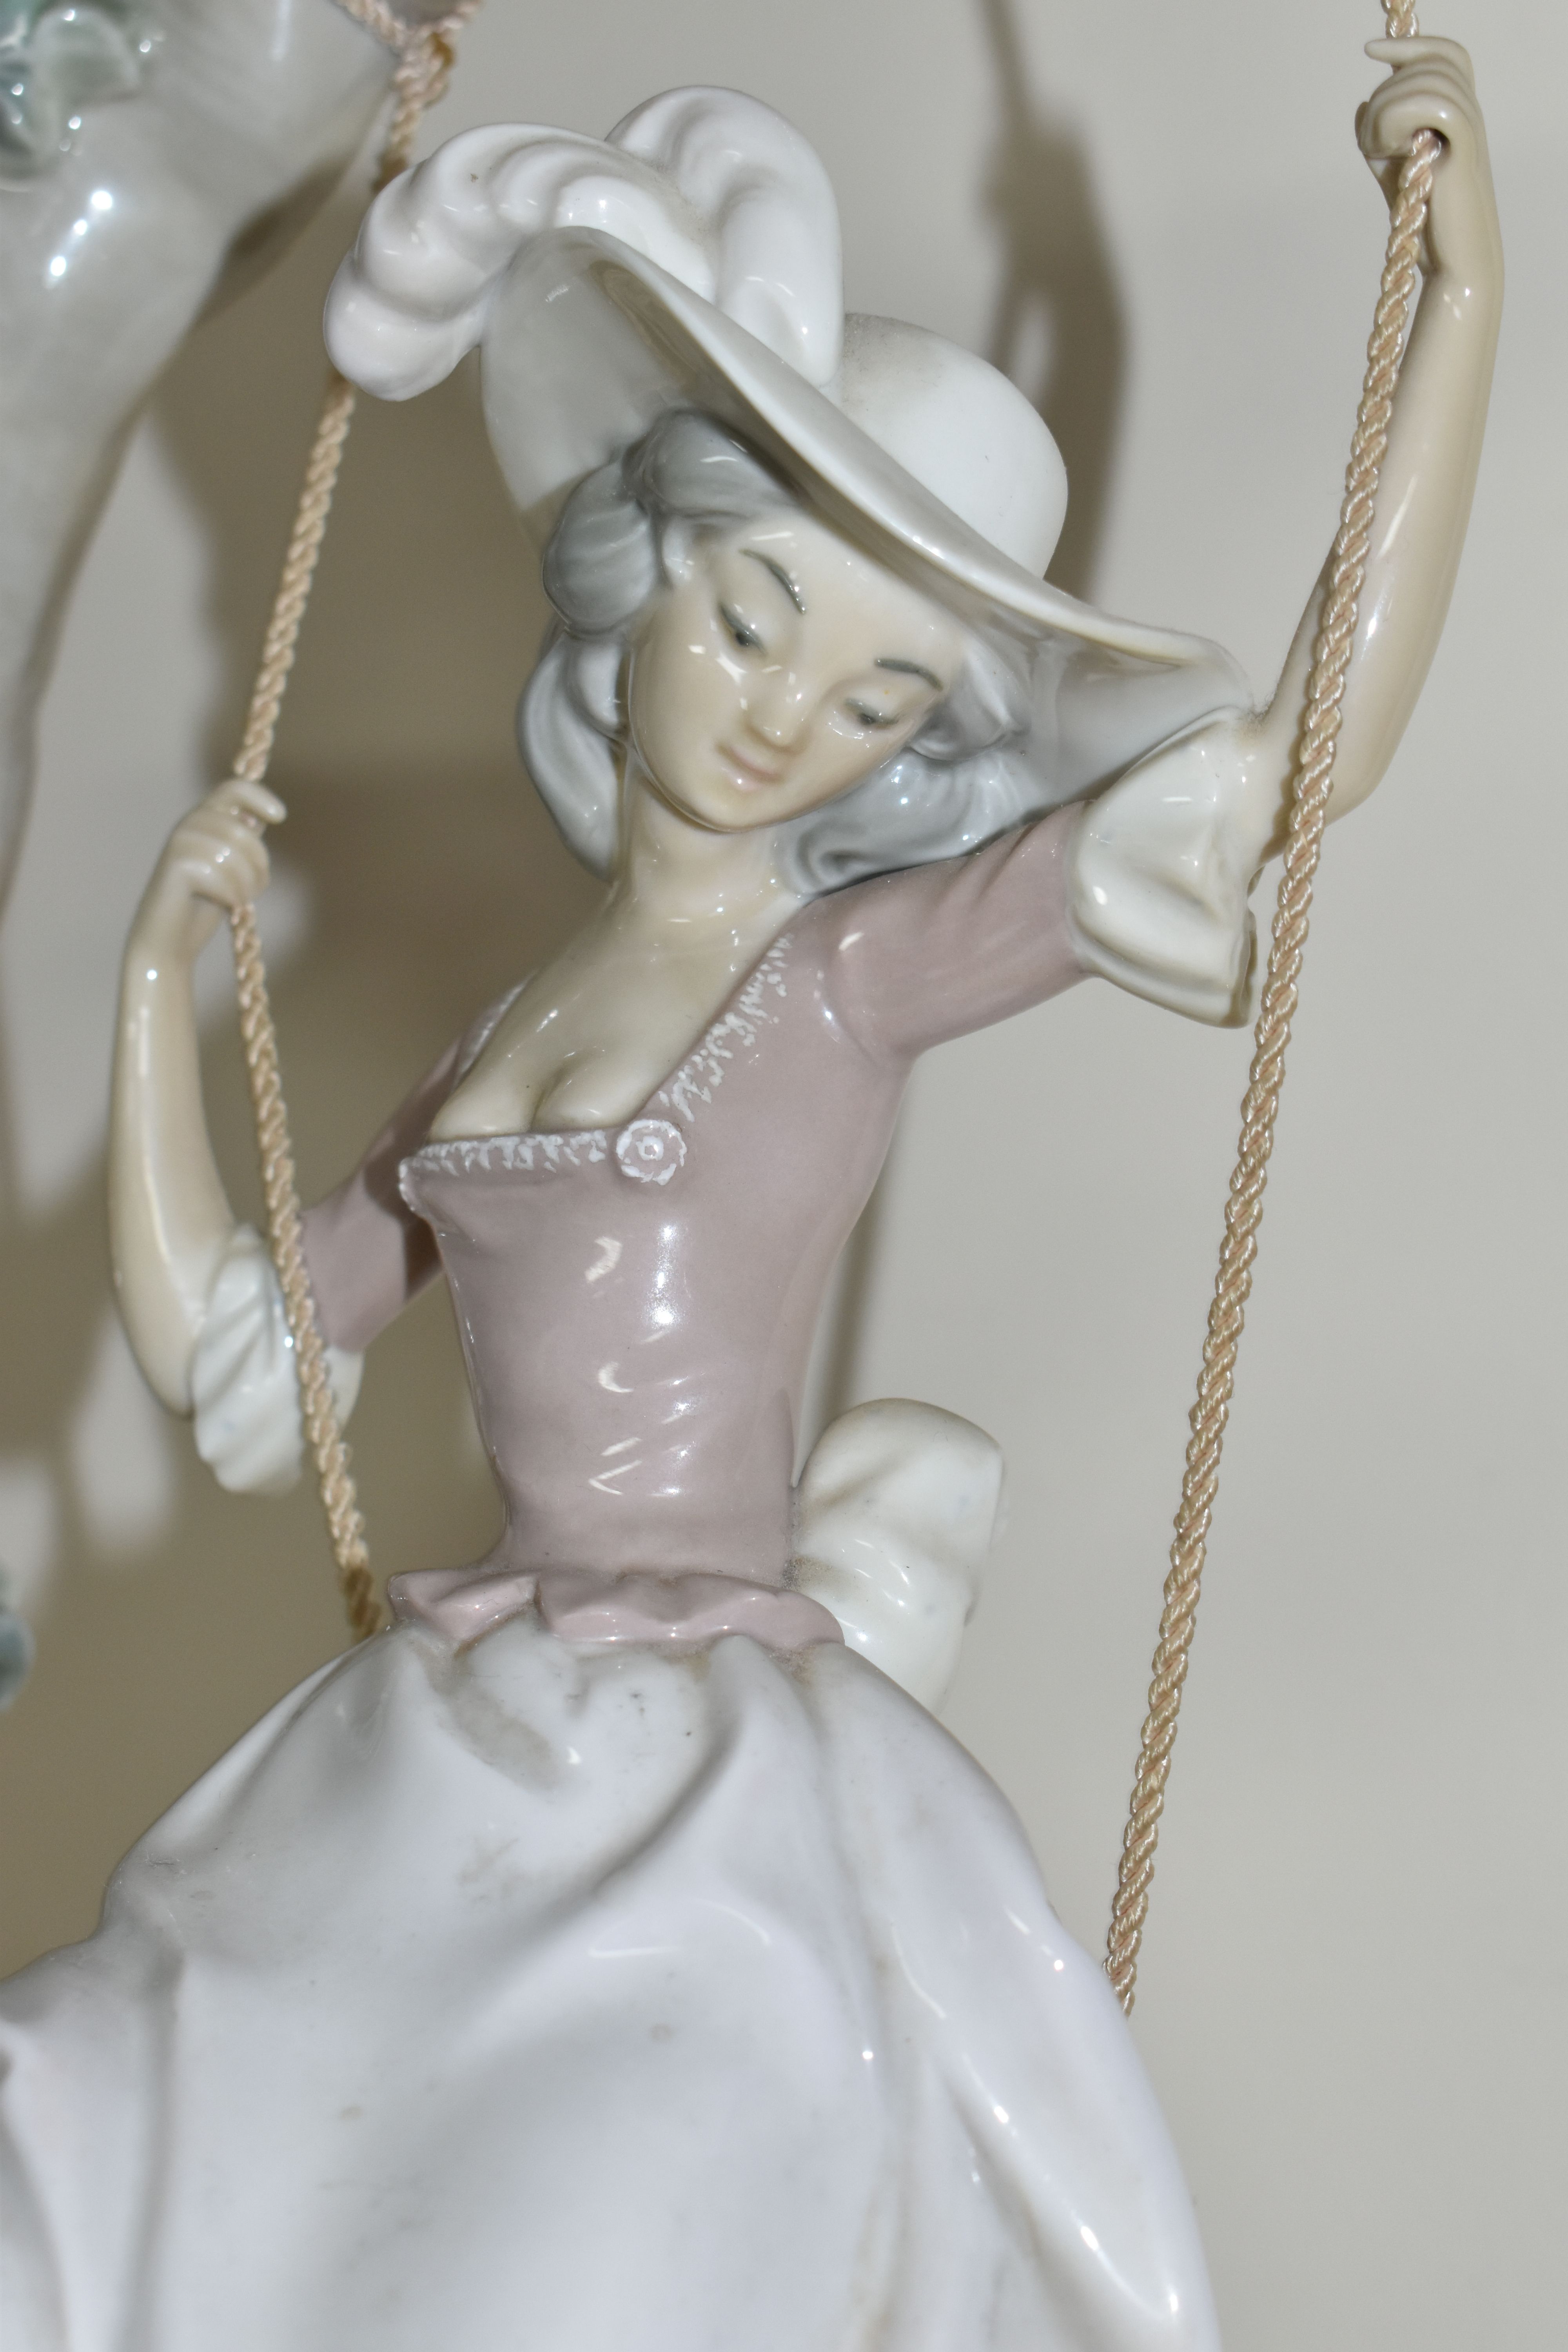 A LLADRO 'SWINGING' SCULPTURE OF A GIRL ON A SWING, model no 1297, sculptor Salvador Debon, issued - Image 6 of 7